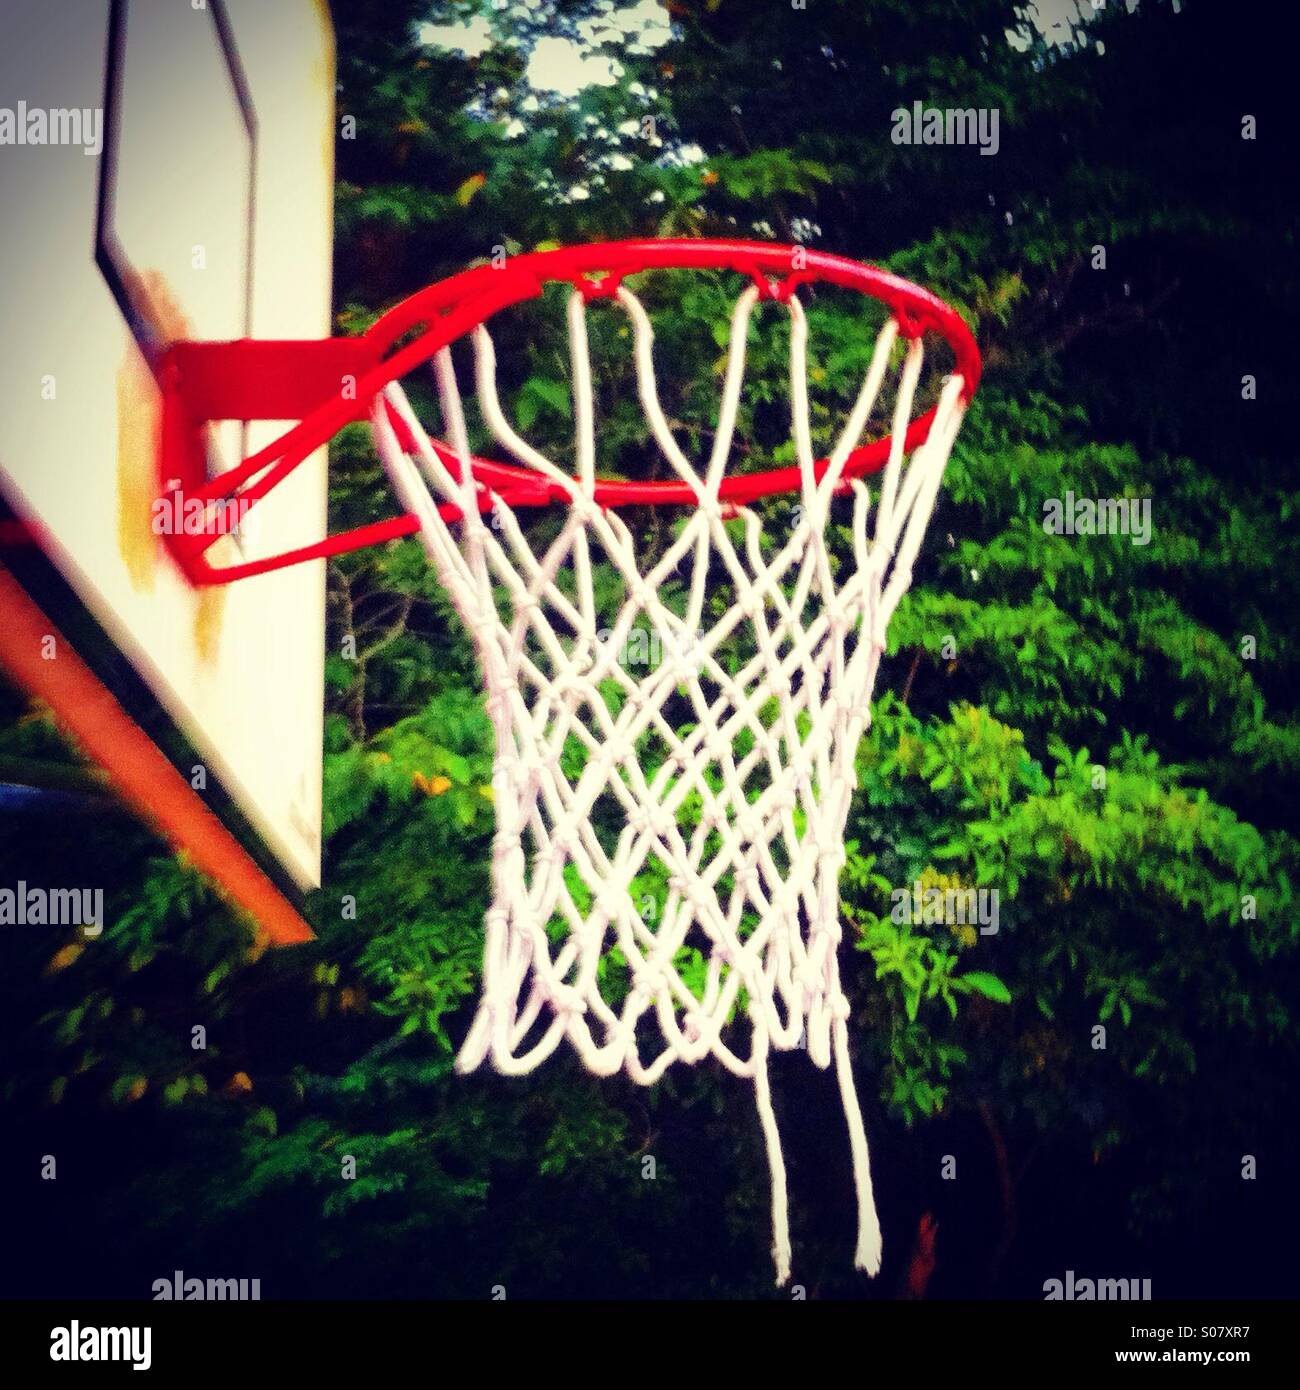 Basketball ring outdoor on a green background Stock Photo - Alamy